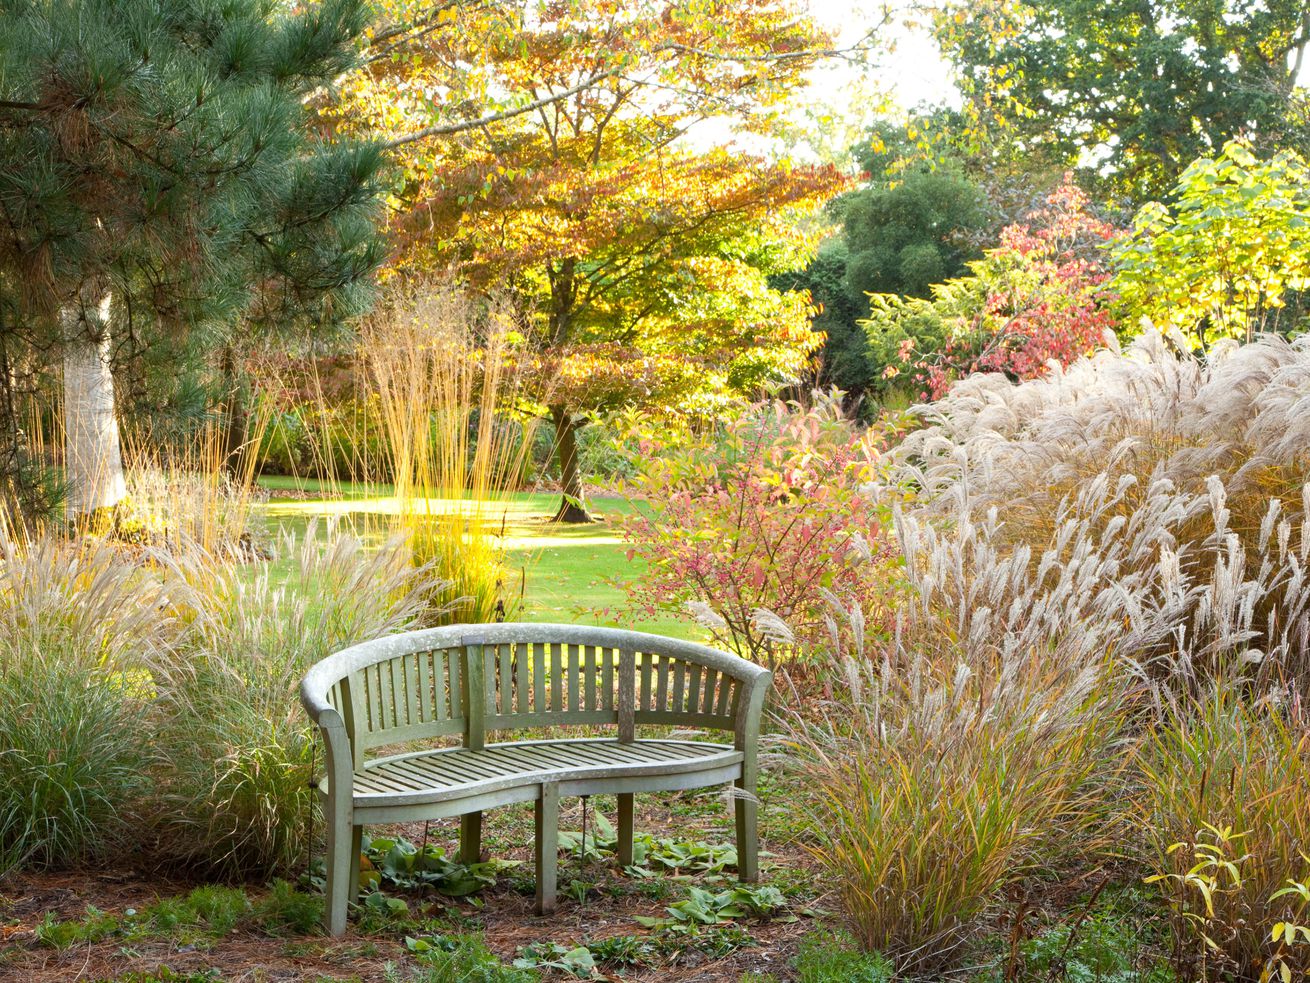 A bench surrounded by ornamental grass